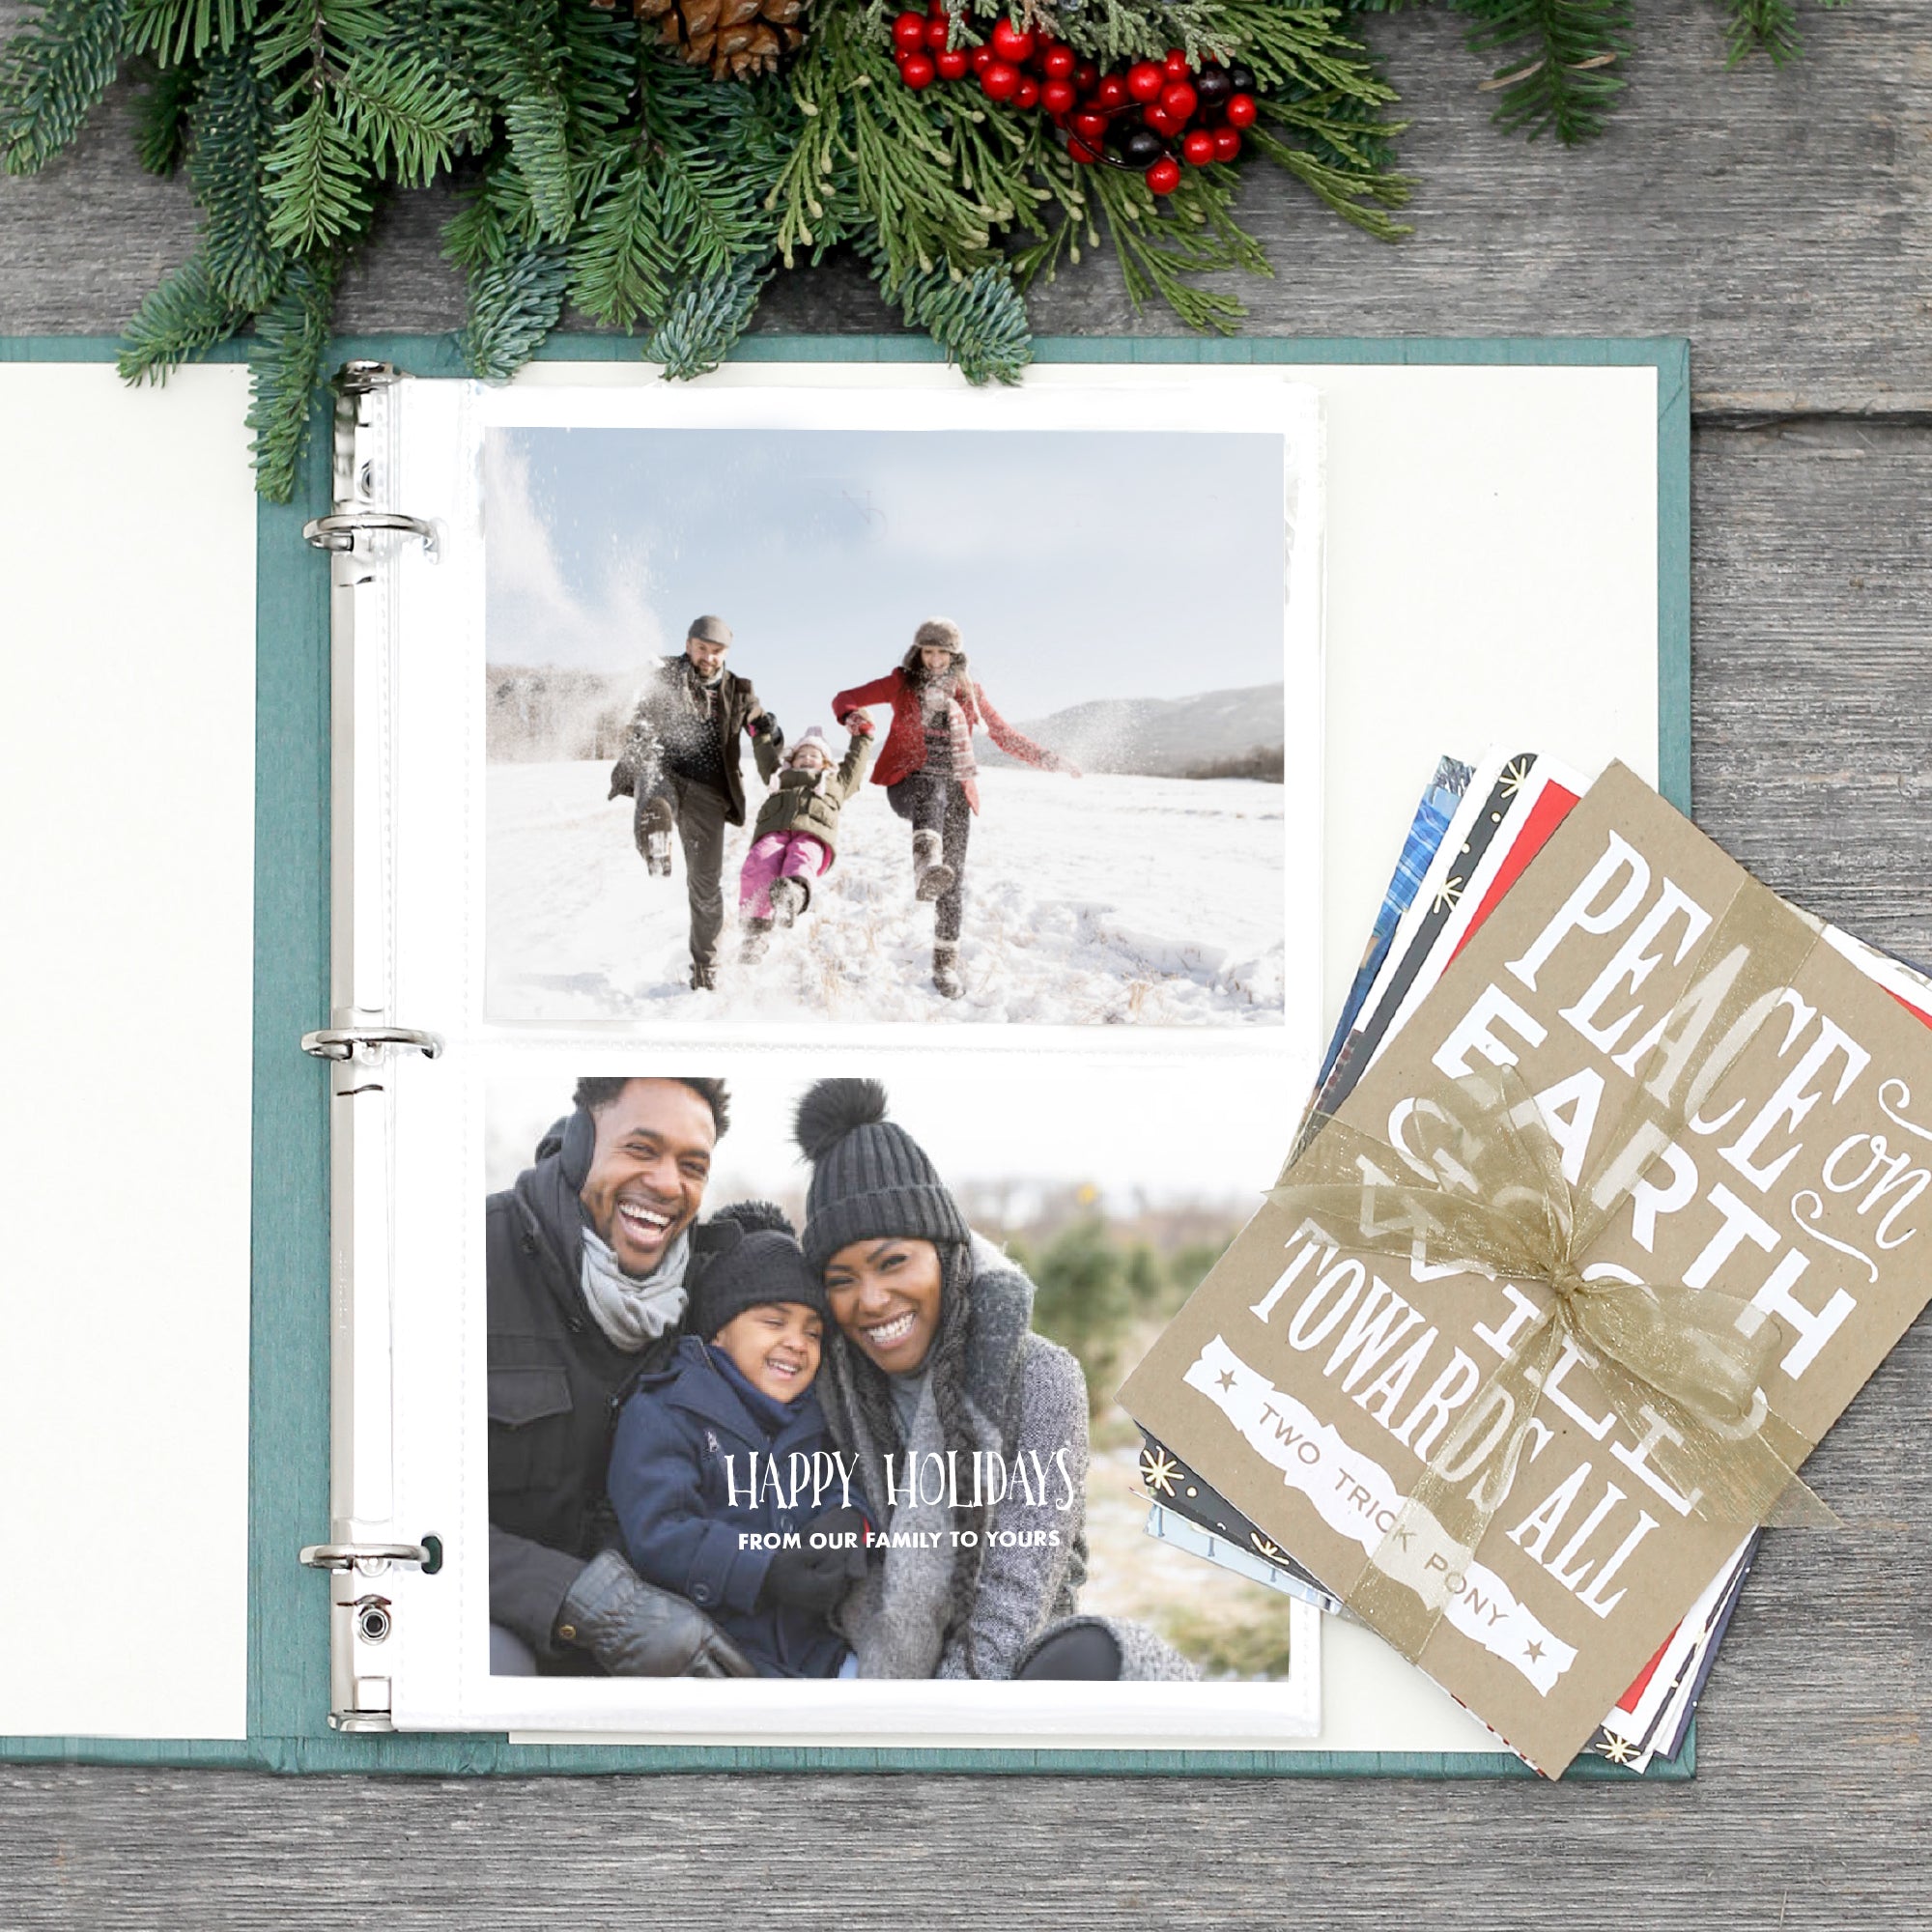 Christmas Memories Book with Personalized Embossing